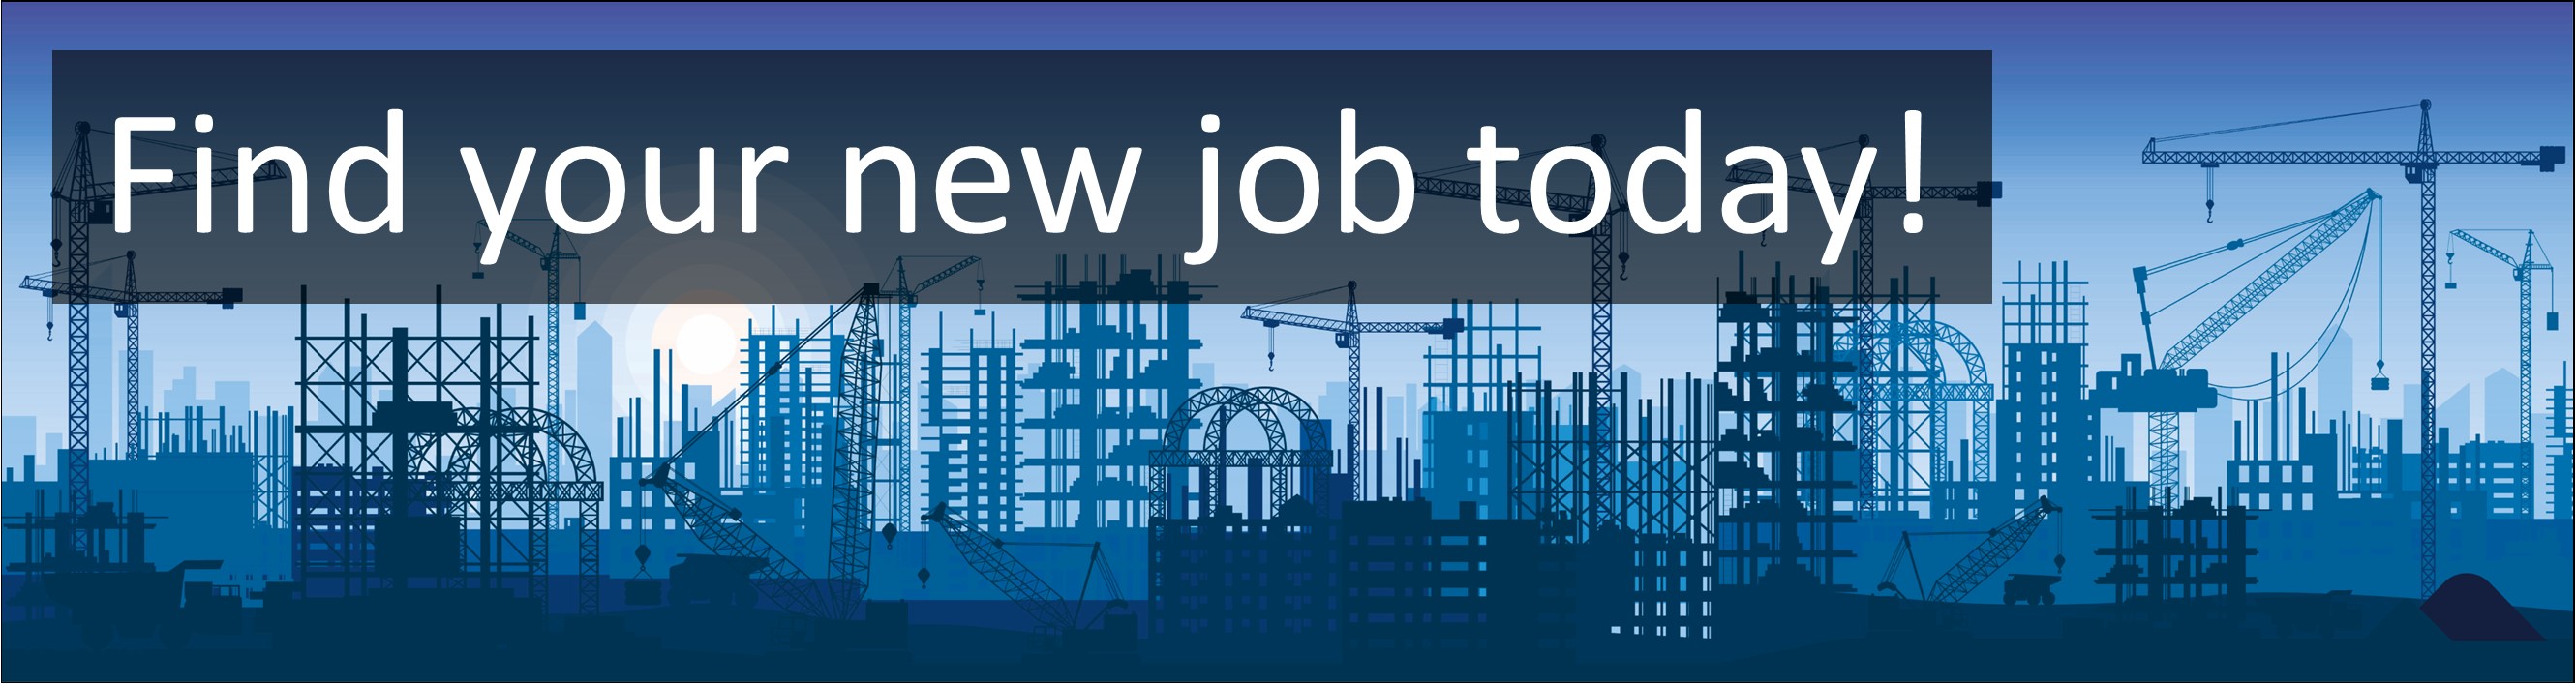 Construction & Trades Jobs. Construction Materials Technician / Concrete Condition Testing / CMT Jobs, Careers & Vacancies UK wide Advertised by AWD online – Multi-Job Board Advertising and CV Sourcing Recruitment Services